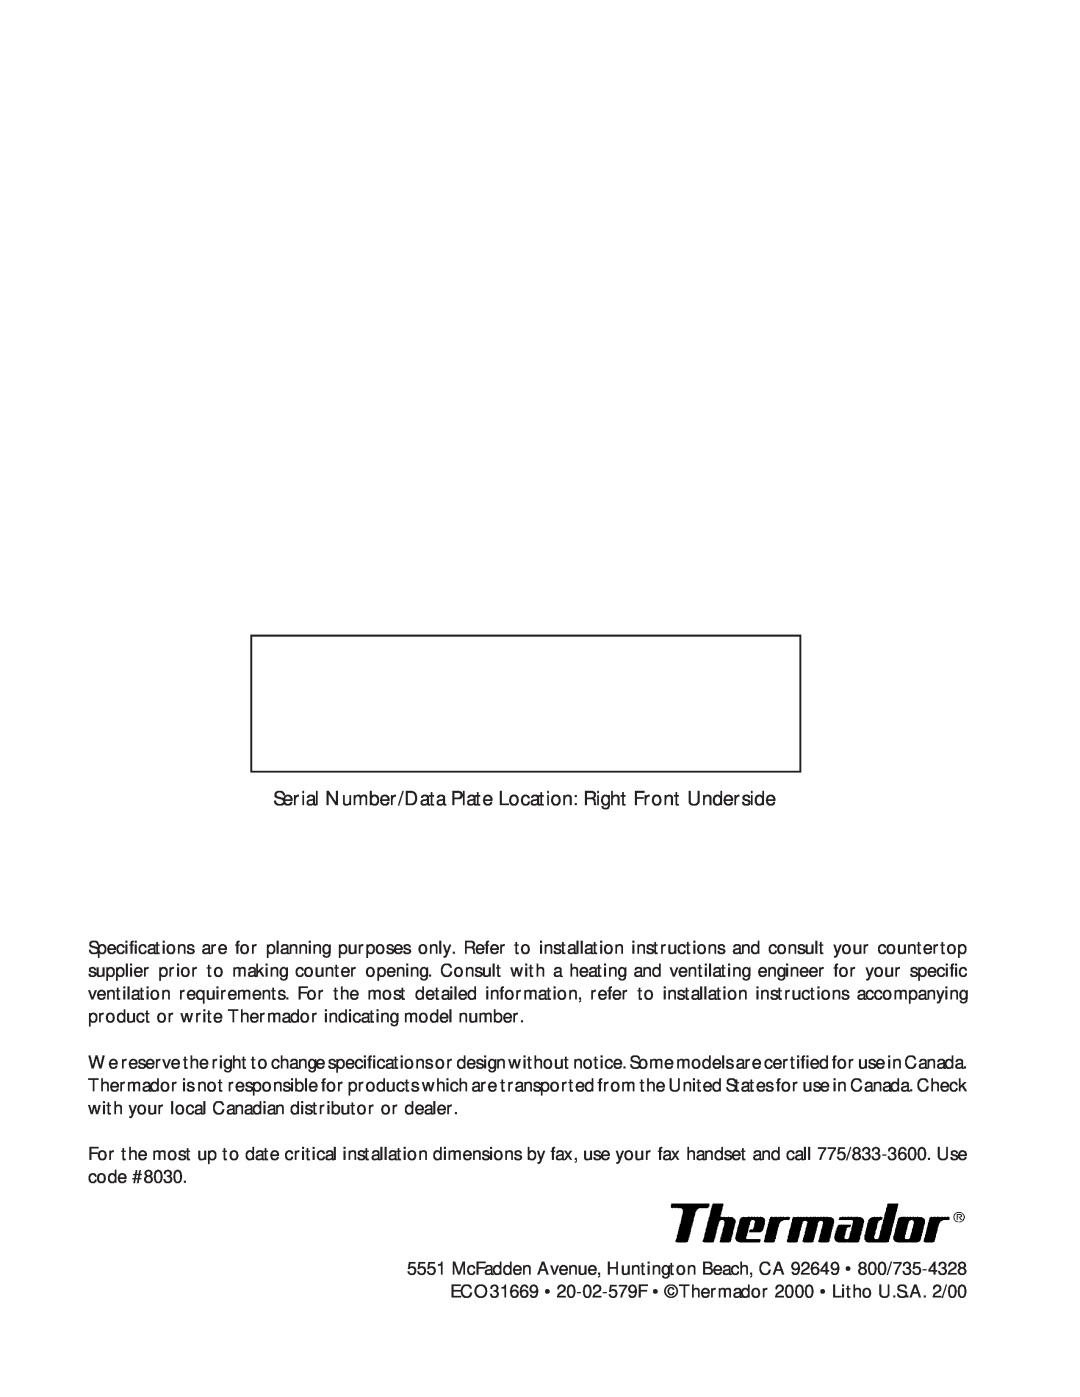 Thermador SGCS456, SGC456 owner manual Serial Number/Data Plate Location Right Front Underside 